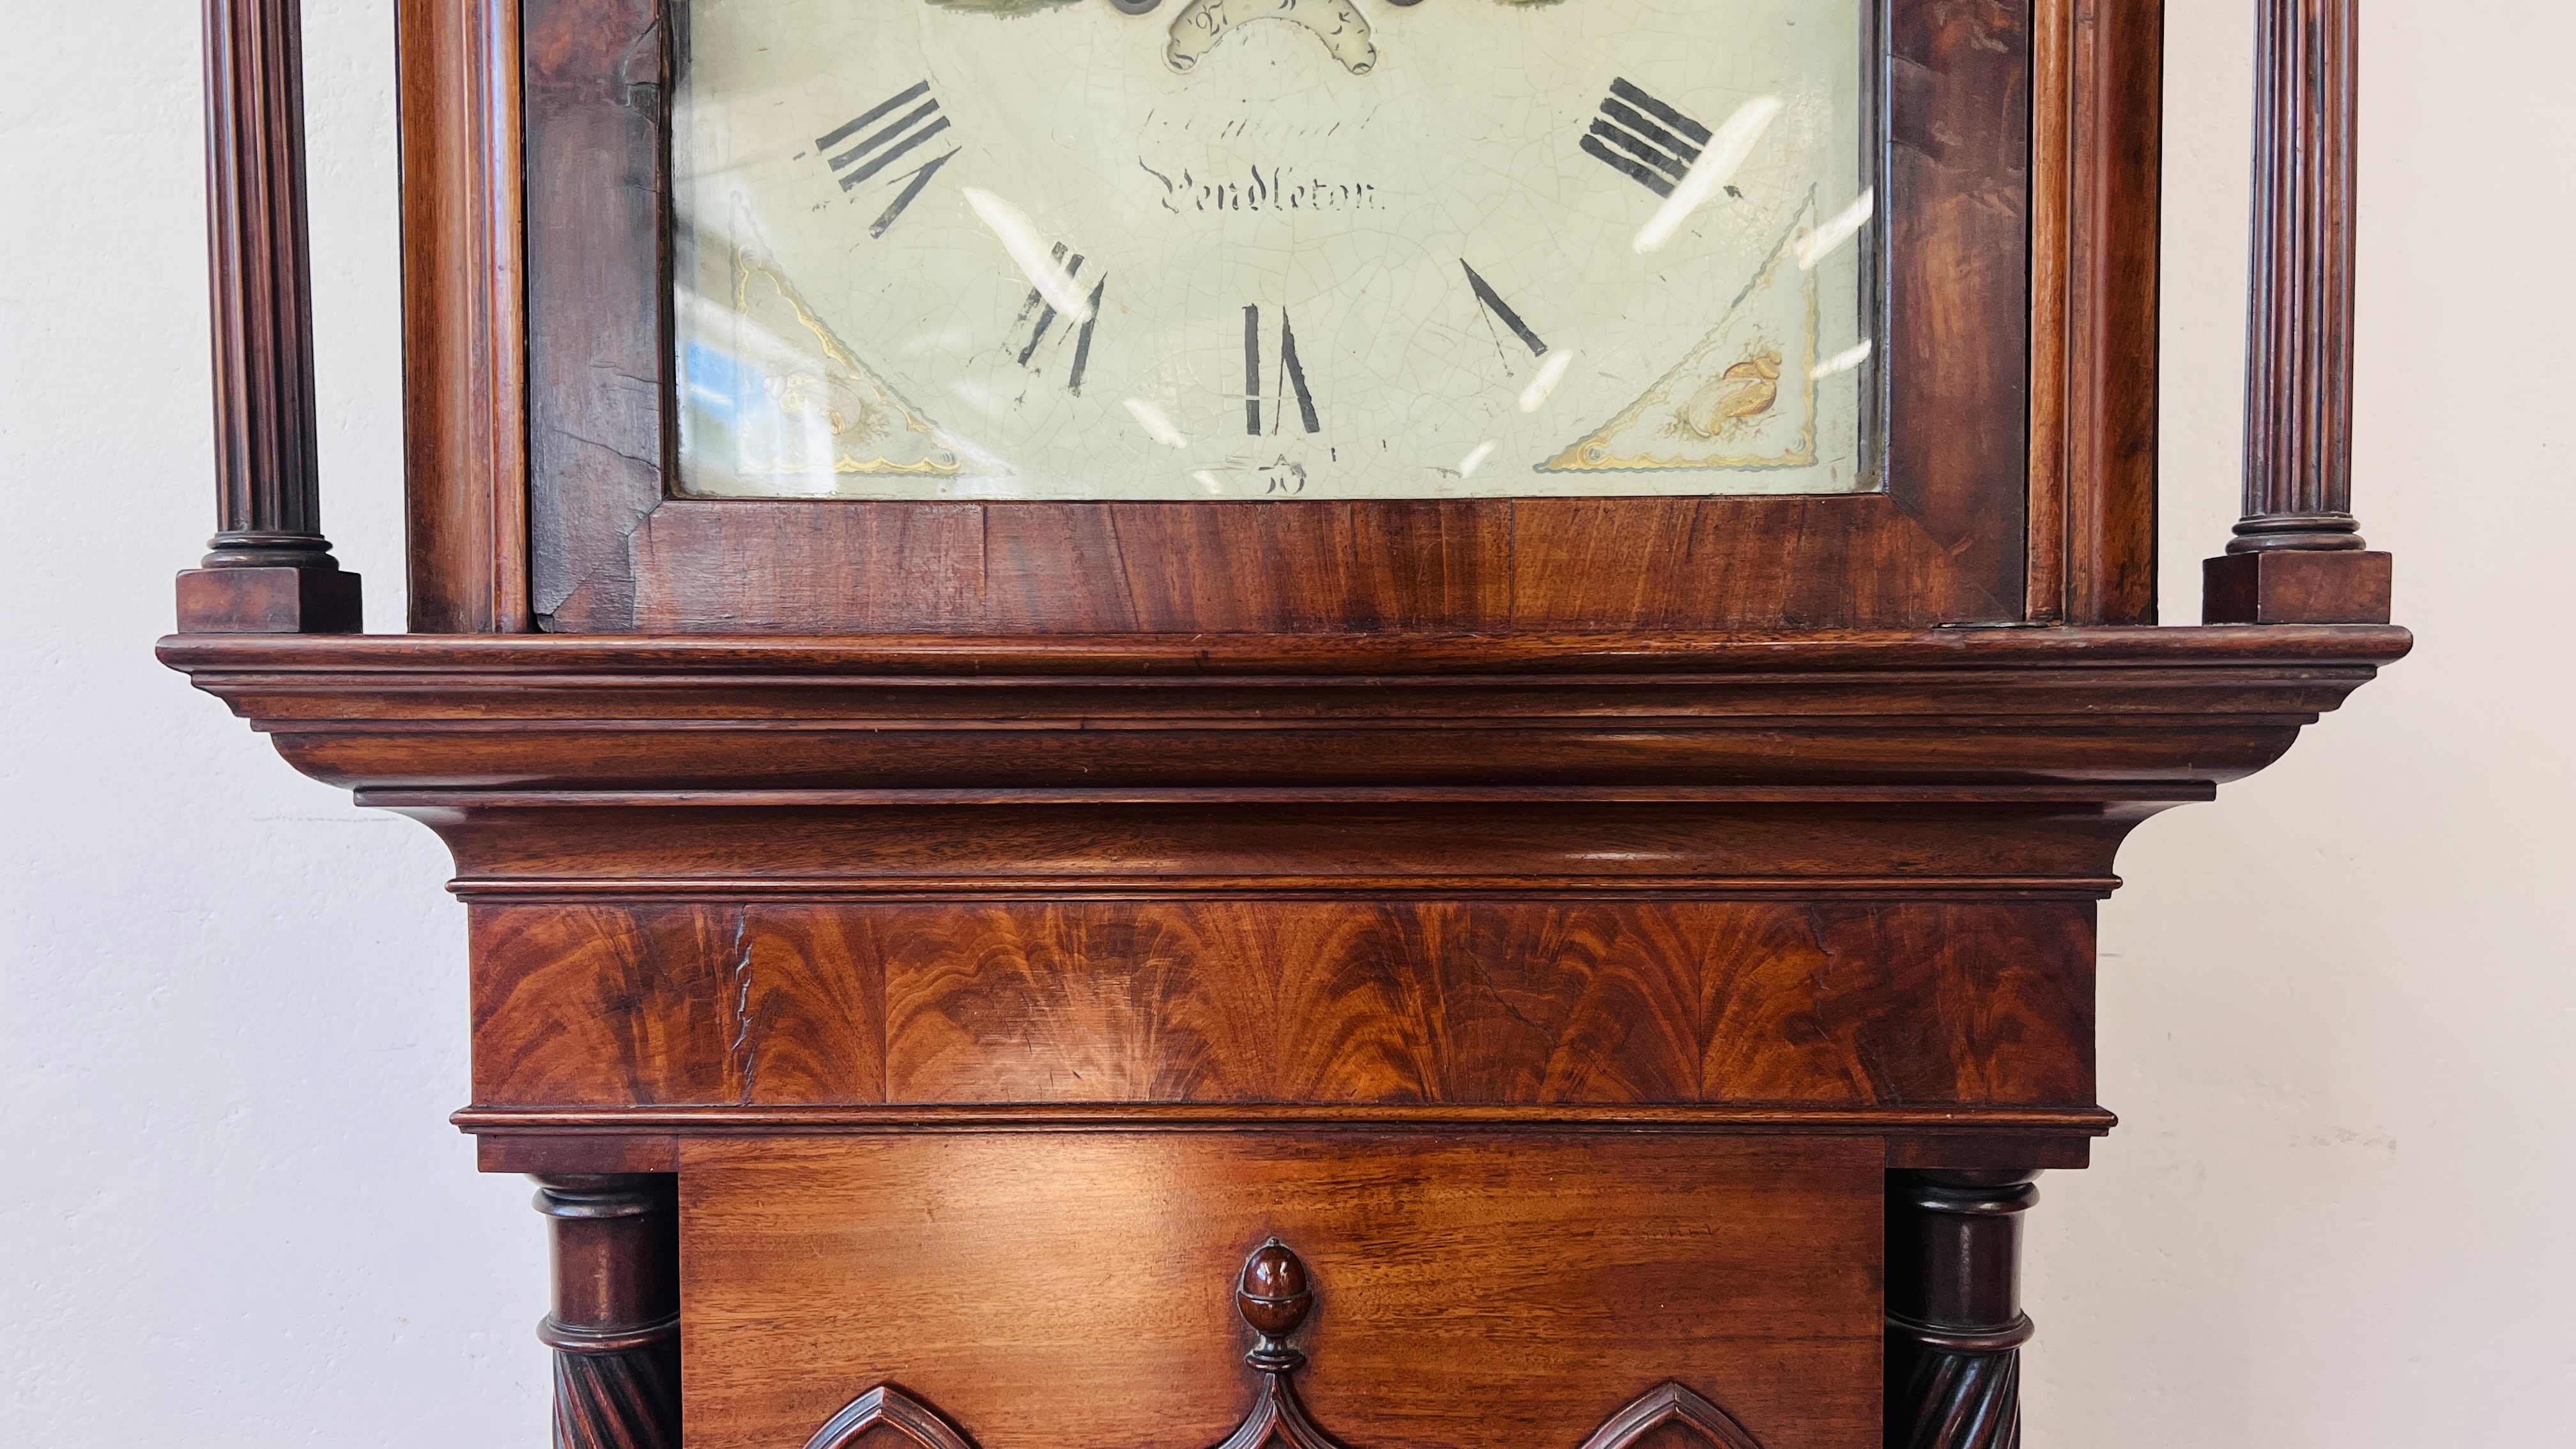 A MAHOGANY LONG CASE CLOCK ARCHED HAND PAINTED MOON PHASE DIAL. - Image 6 of 35